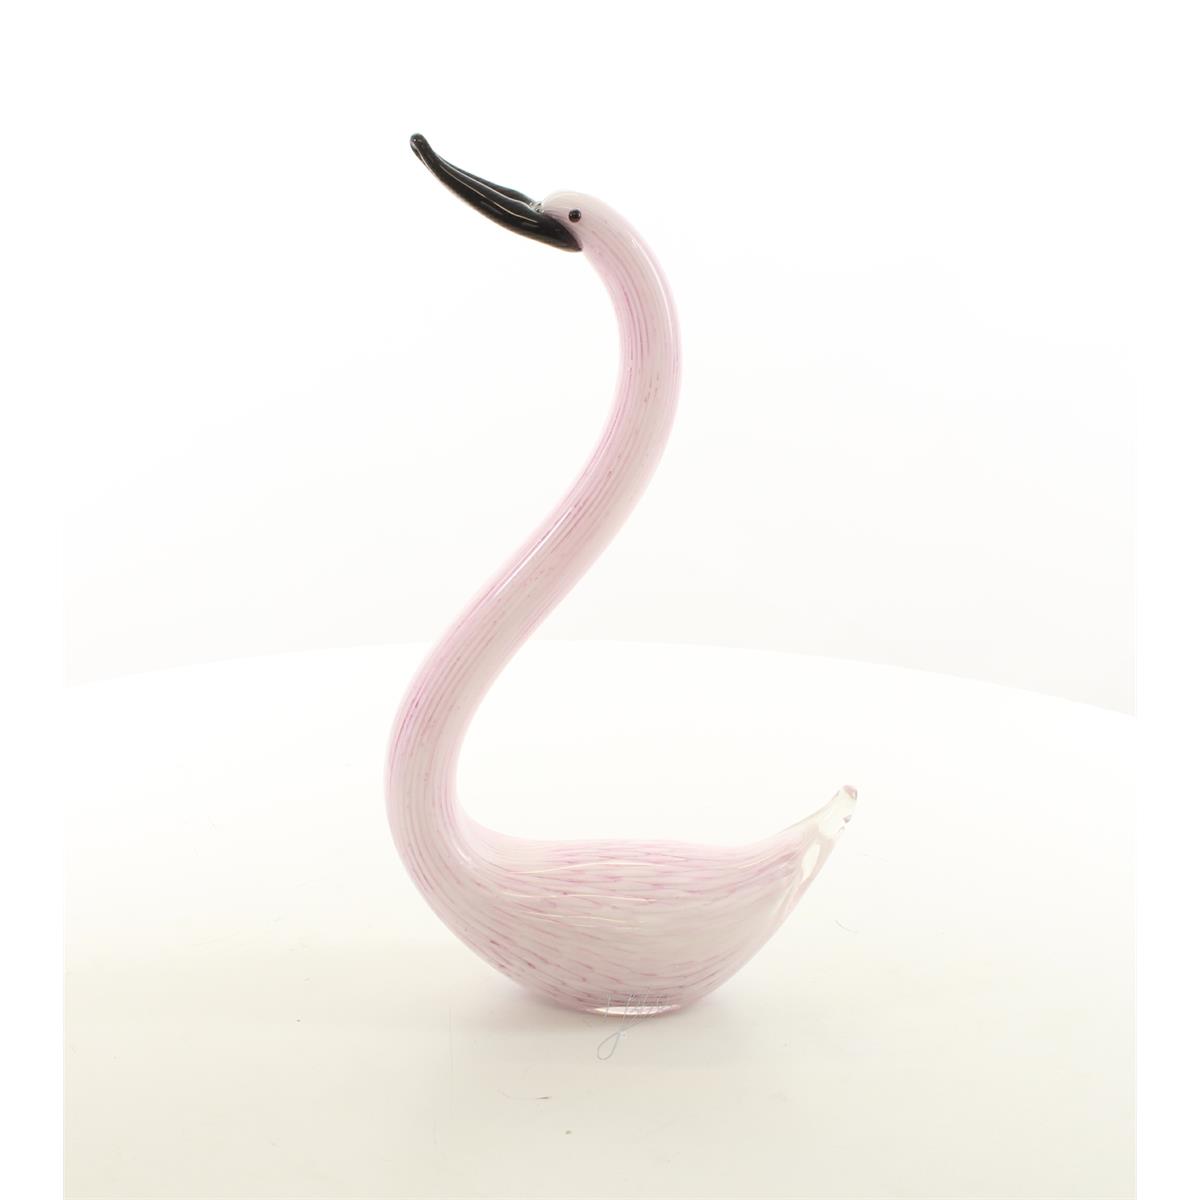 A MURANO STYLE GLASS FIGURINE OF A SWAN